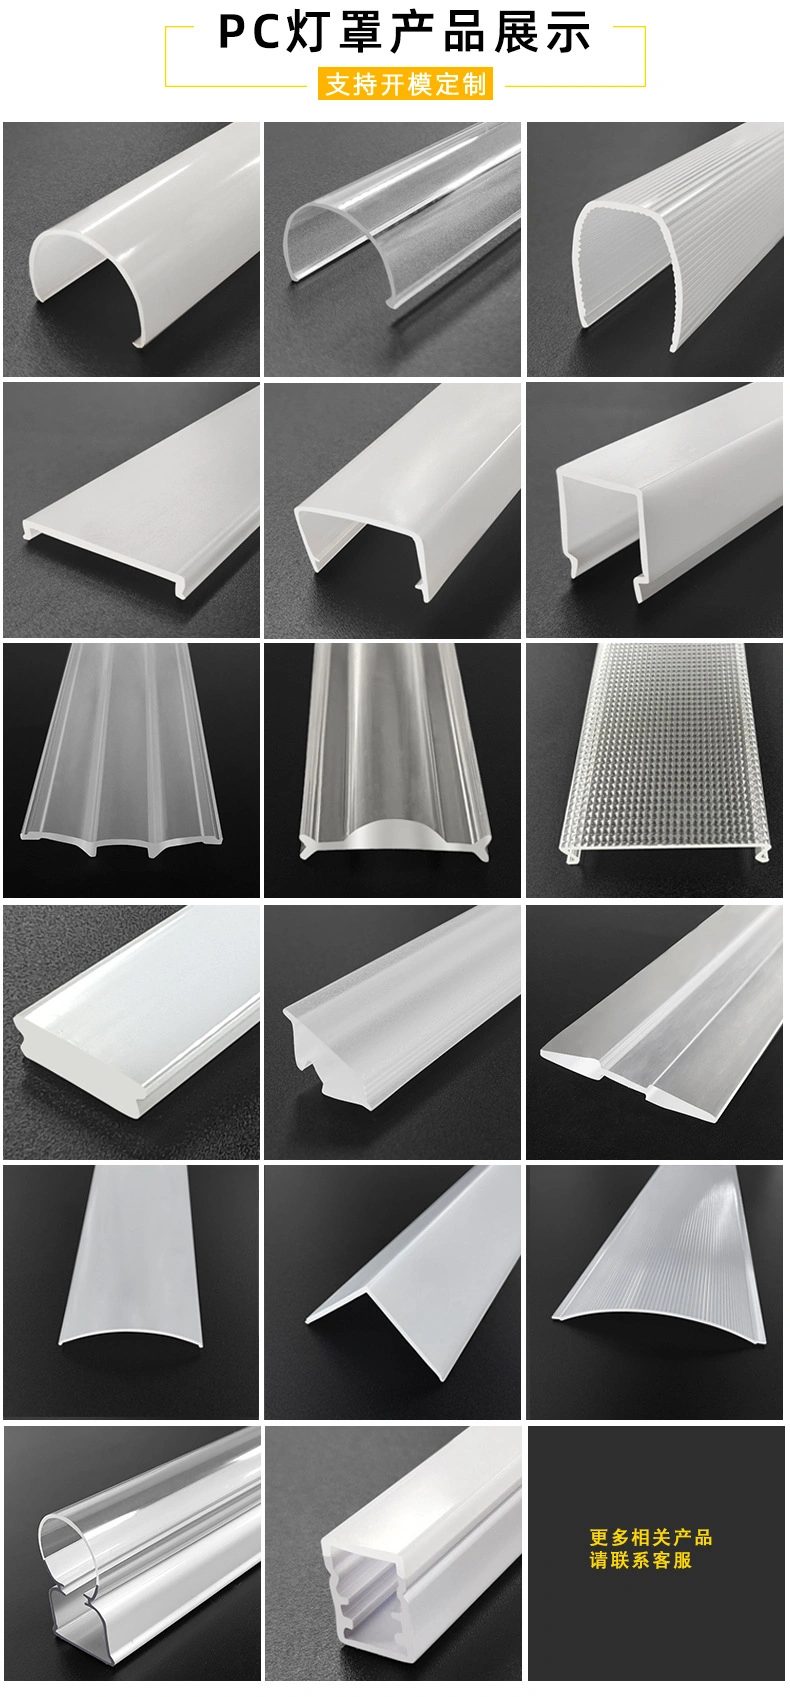 Wholesale High Quality PC Polycarbonate Extrusion Tube Lamp Cover LED Tube Light Diffuser